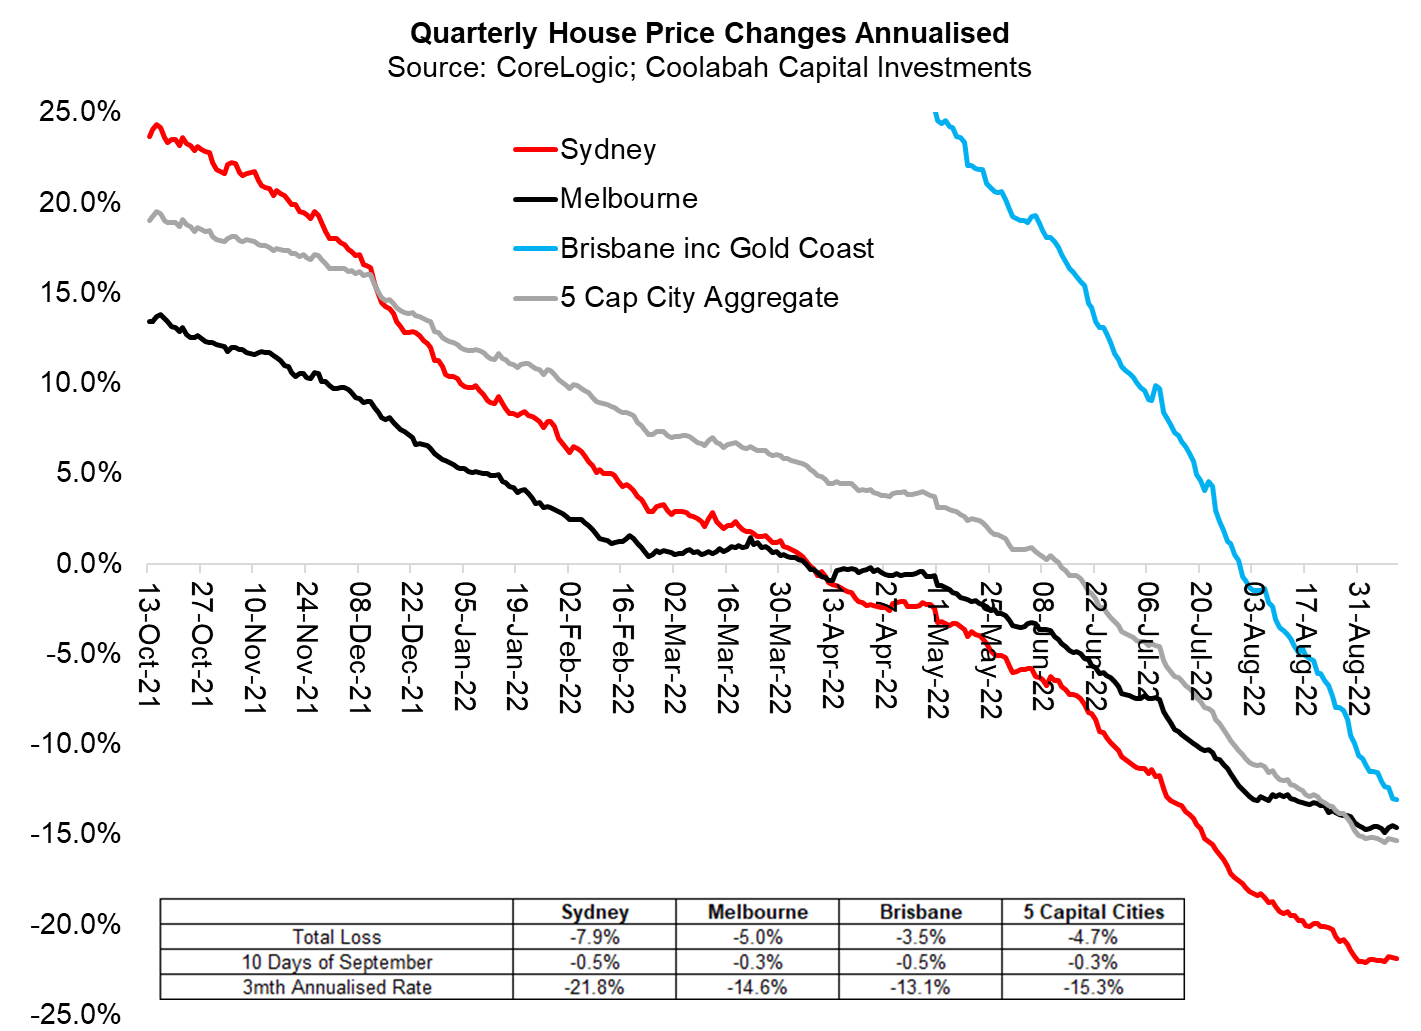 Aussie house prices are declining at a 15% annual pace